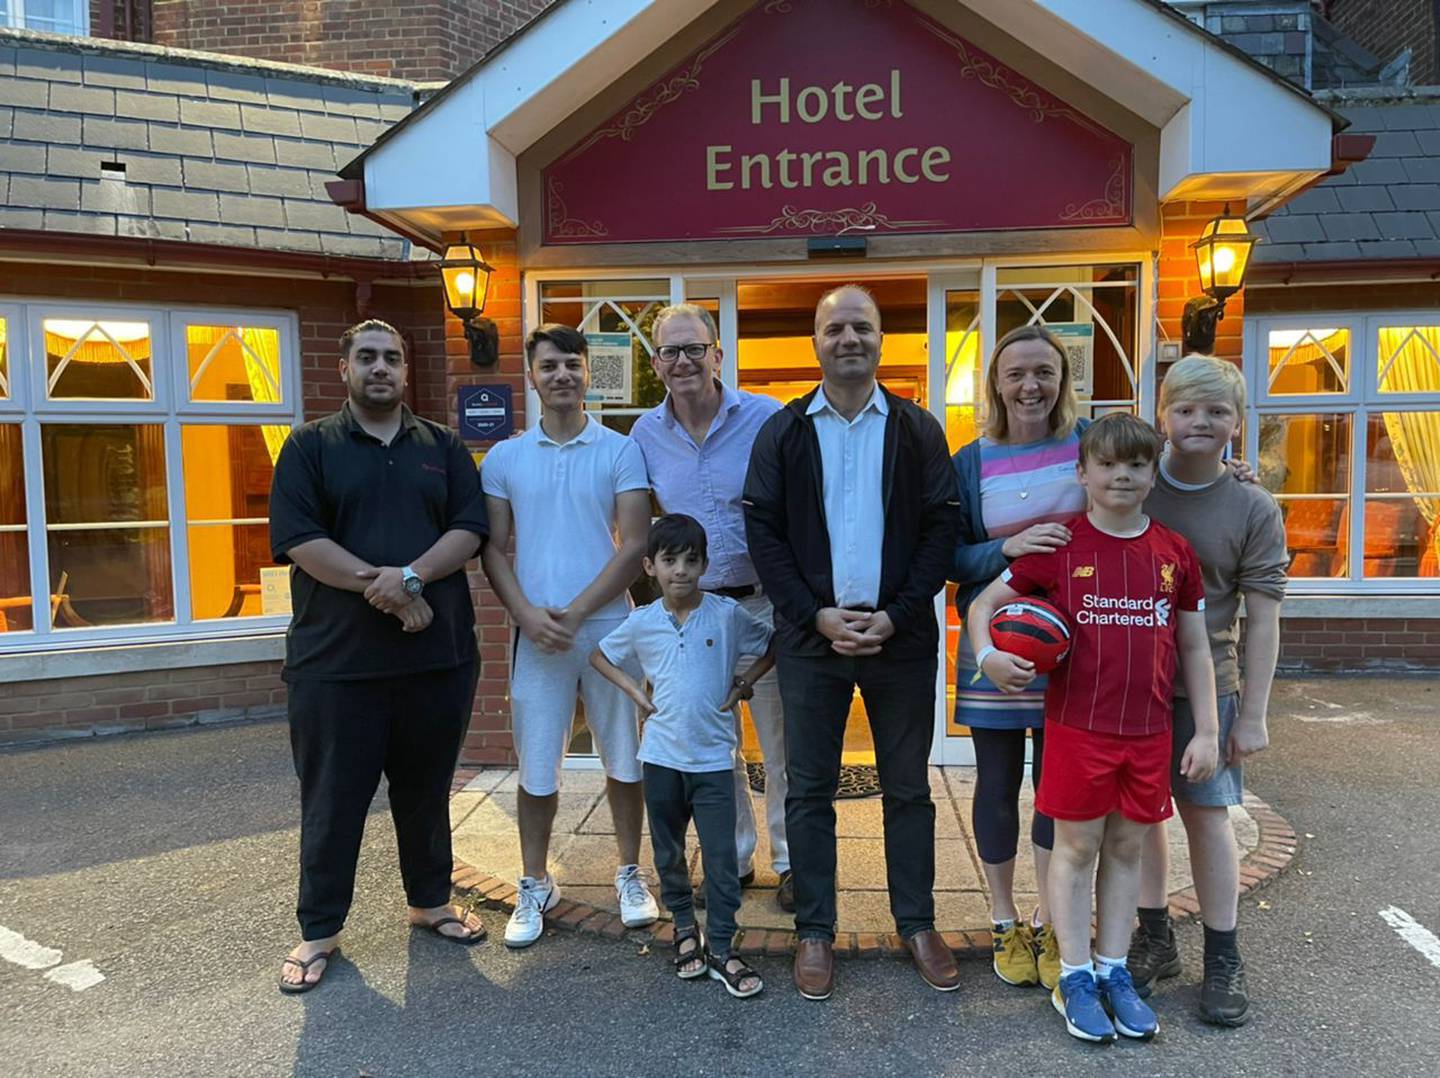 Sayed Hashemi said English couple Richard and Corinne were incredibly kind and welcoming to his family during their stay in Canterbury. Photo: Sayed Hashemi